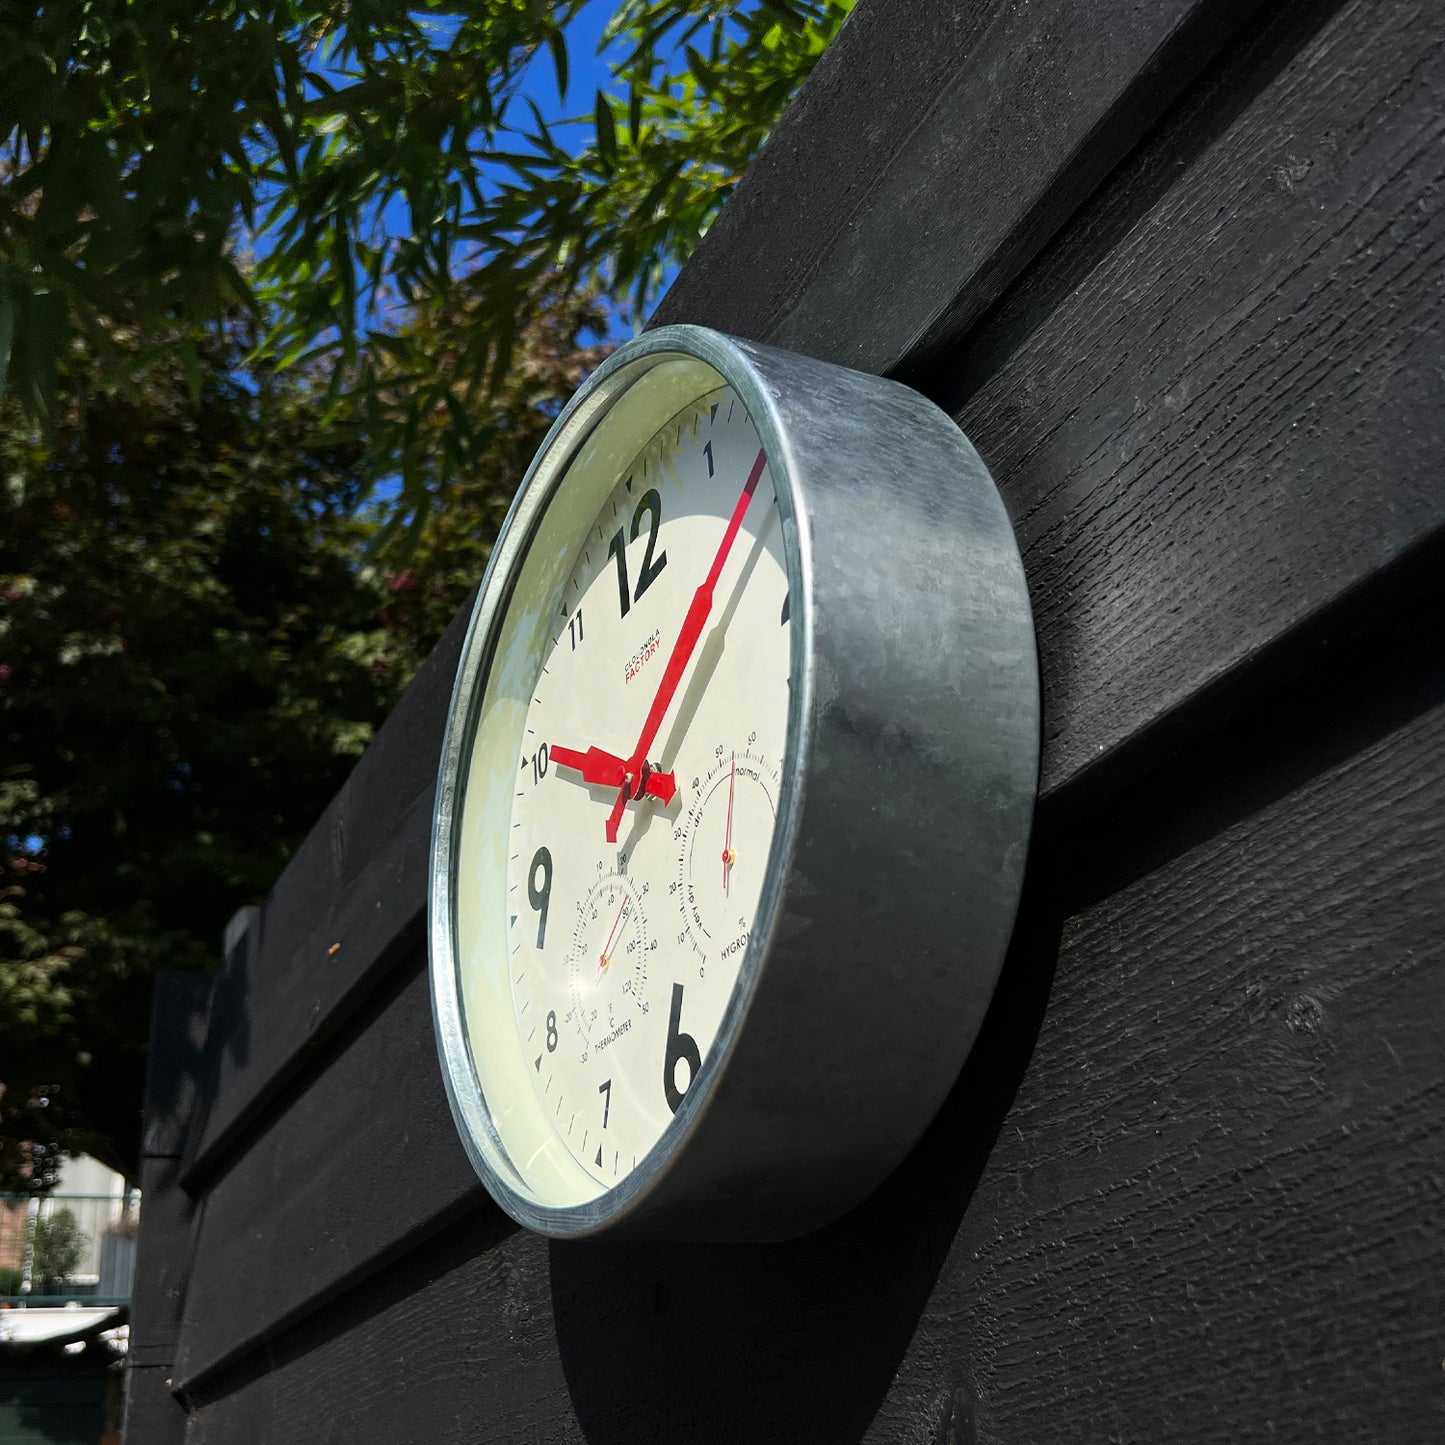 Factory Outdoor Zinc Wall Clock - Weatherproof Station with Barometer & Temperature Readings